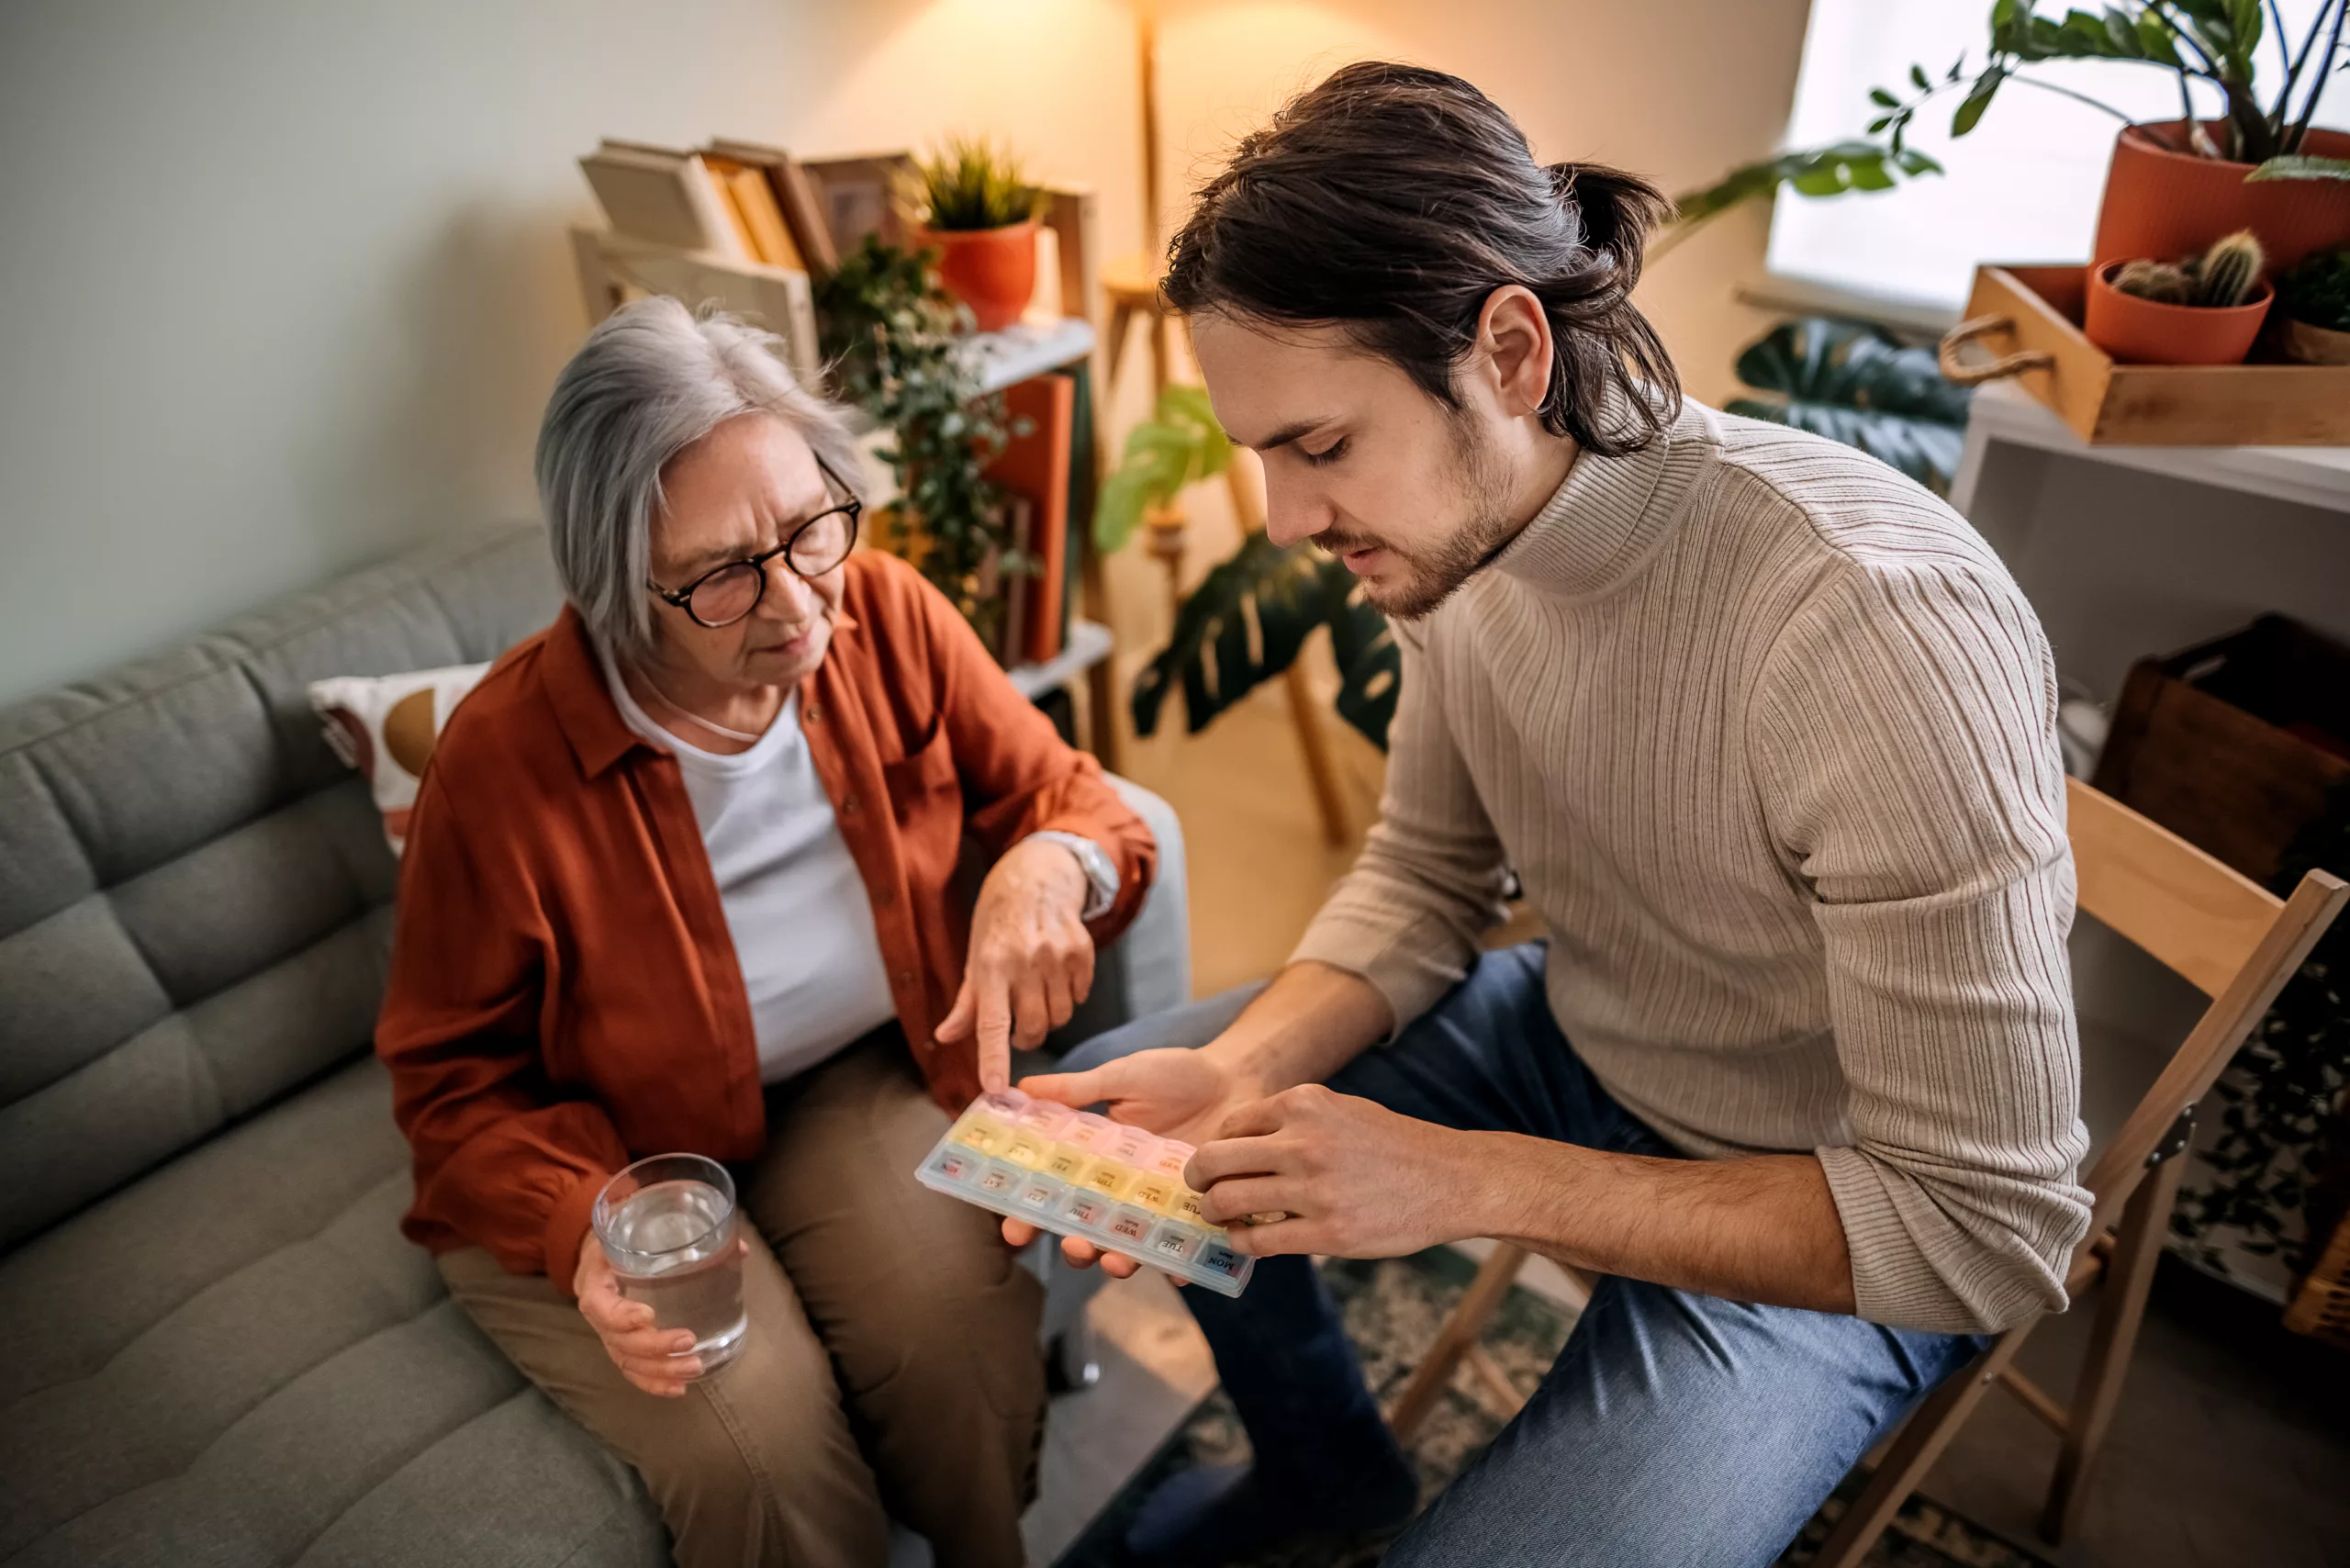 A man assists an elderly woman to take her medication correctly.